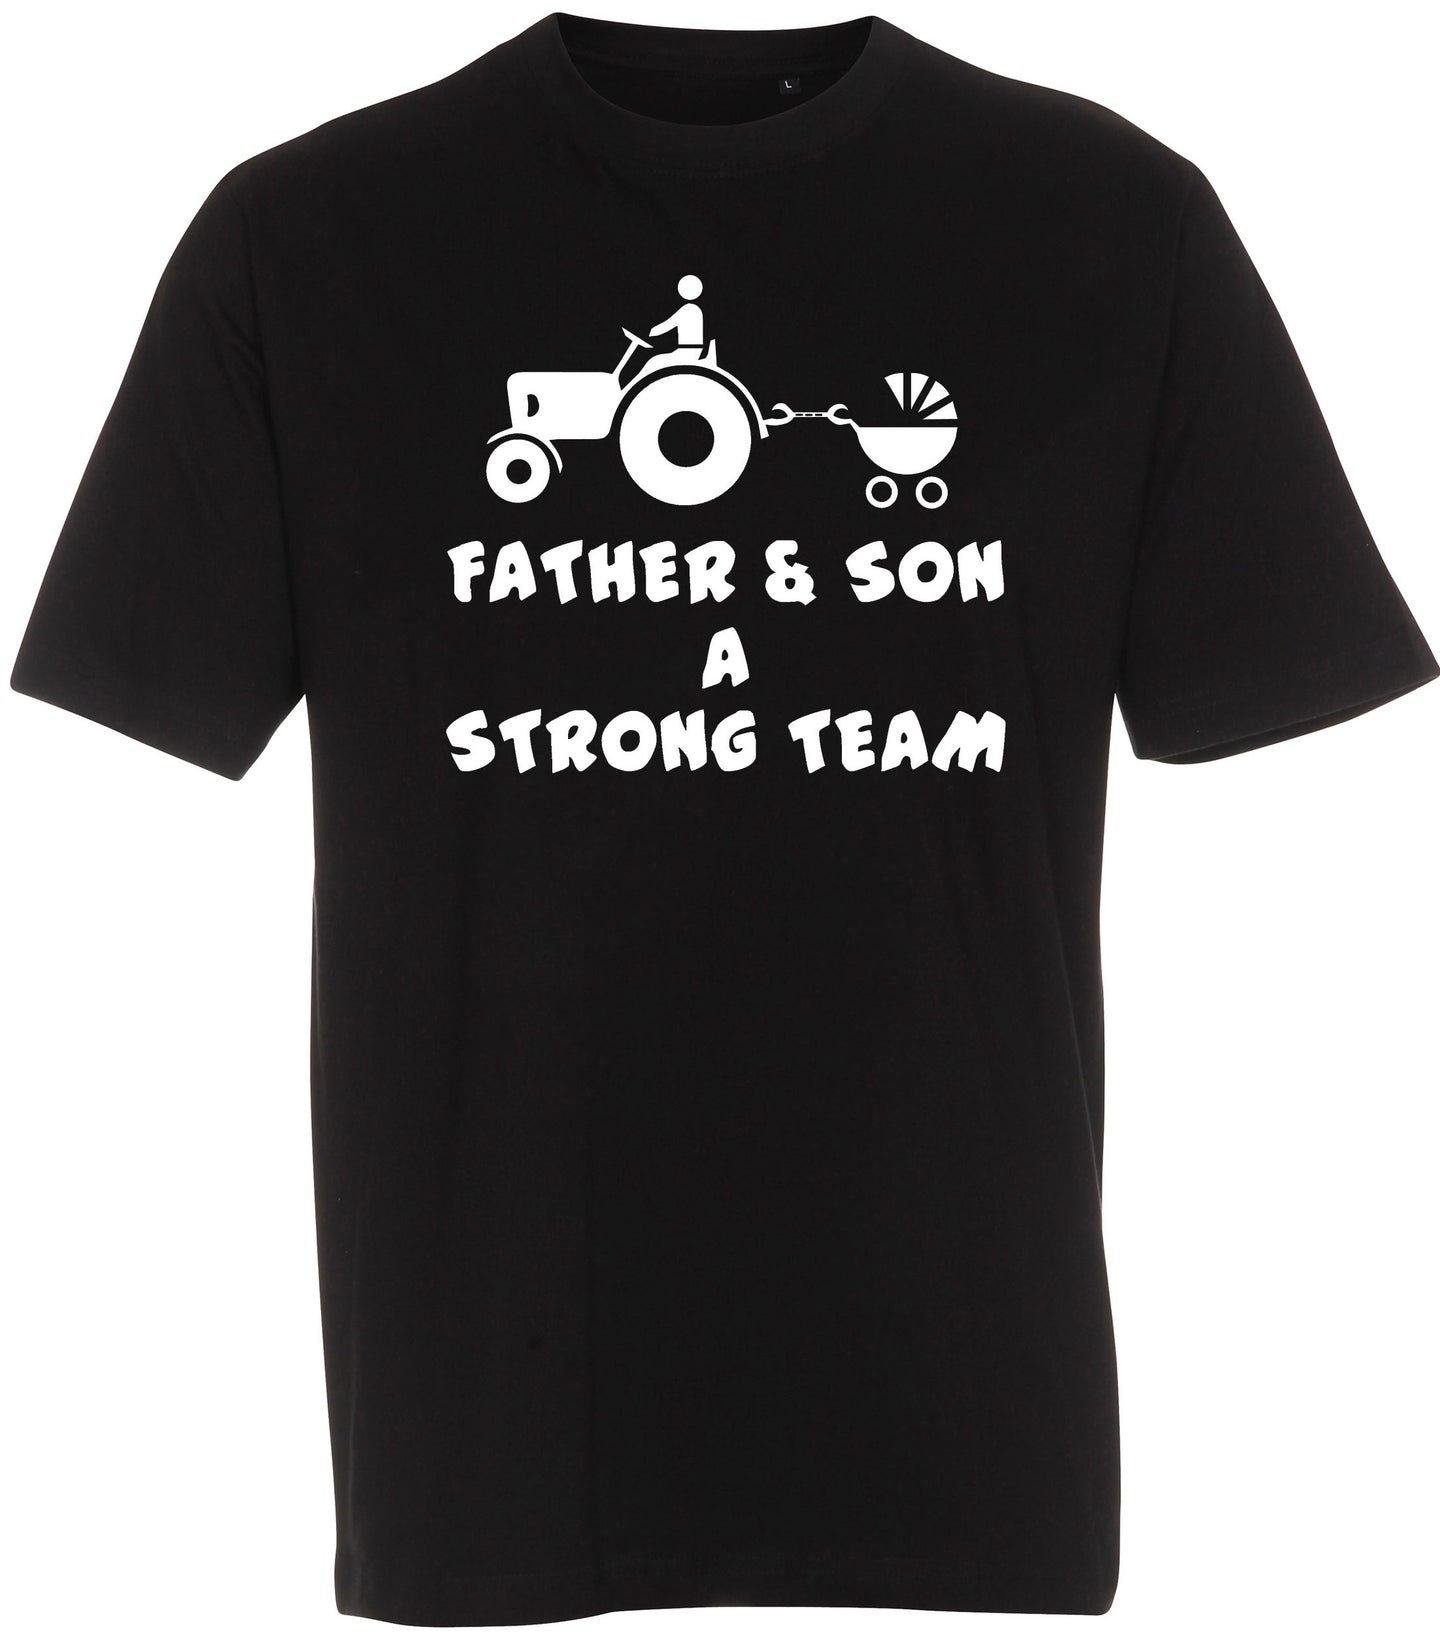 Father and son børne t-shirt